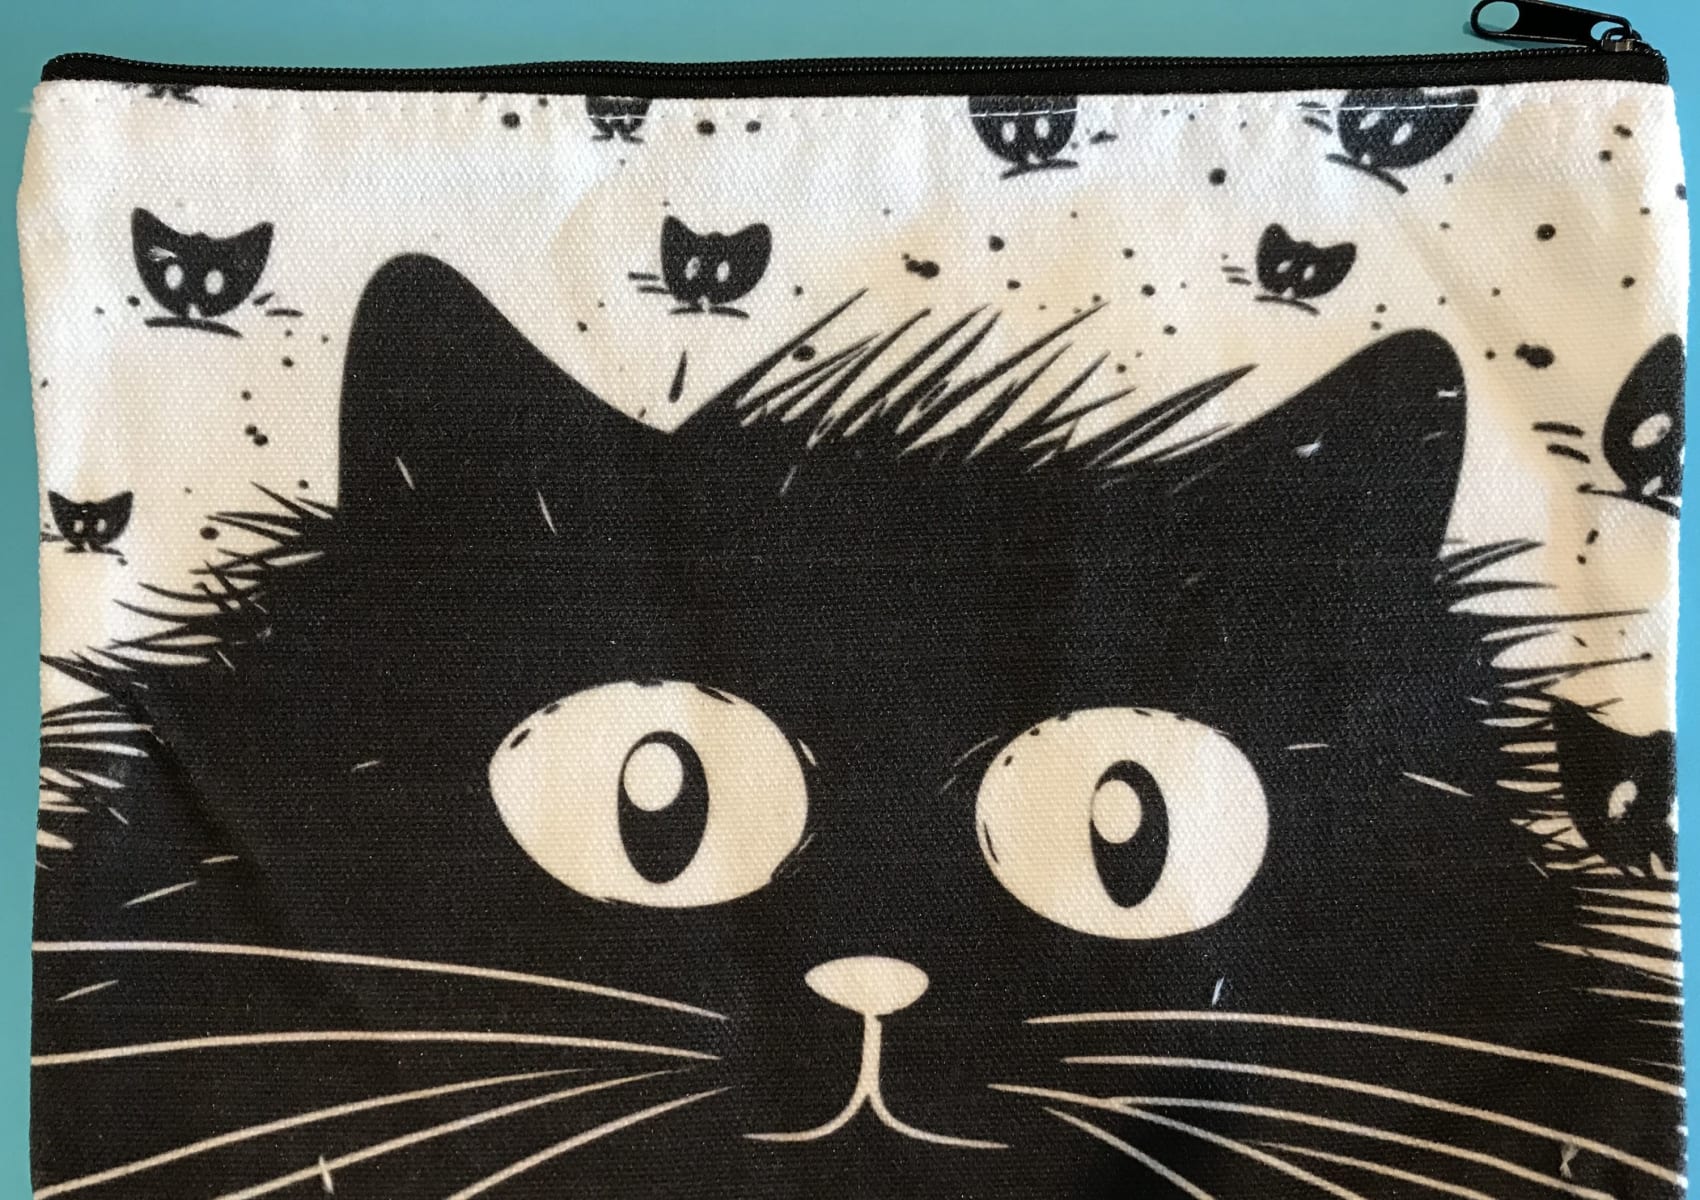 Waxed canvas make up bag with black cat face